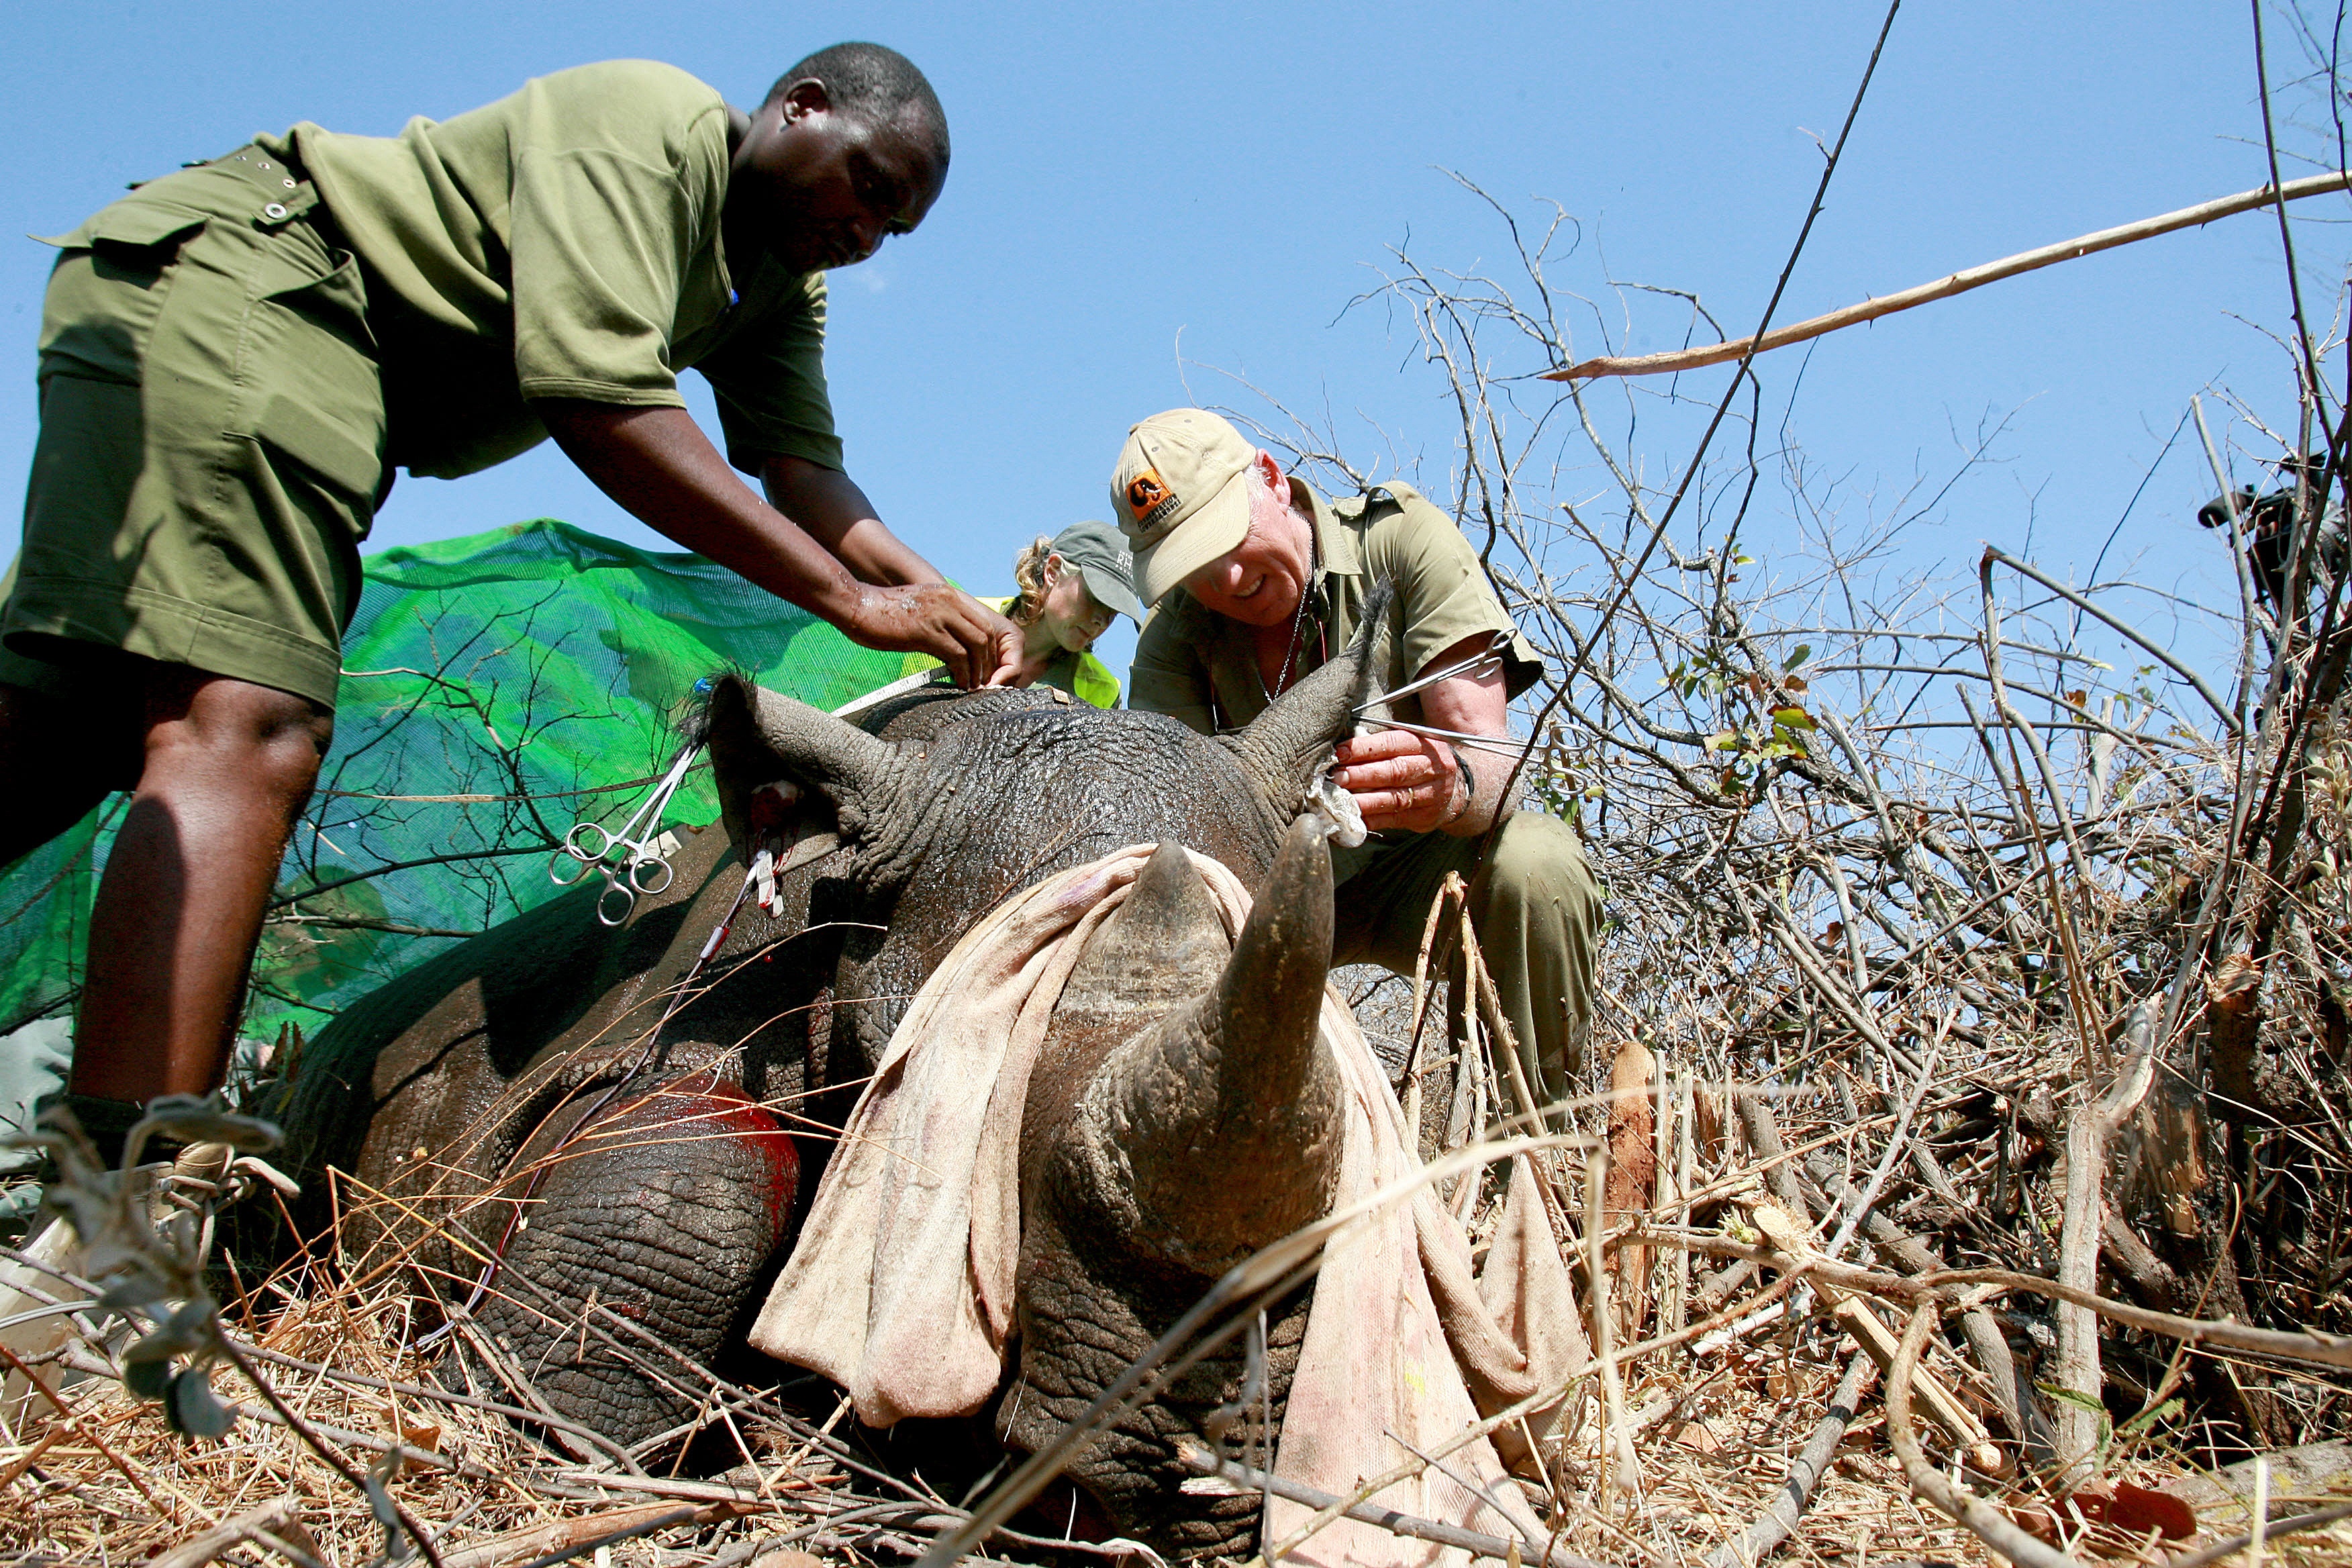 In this file photo from October 8, 2010, workers from the World Wildlife Fund (WWF) go through a process of de-horning  a rhino in Chipinge National Park in Zimbabwe. (DESMOND KWANDE—AFP/Getty Images)